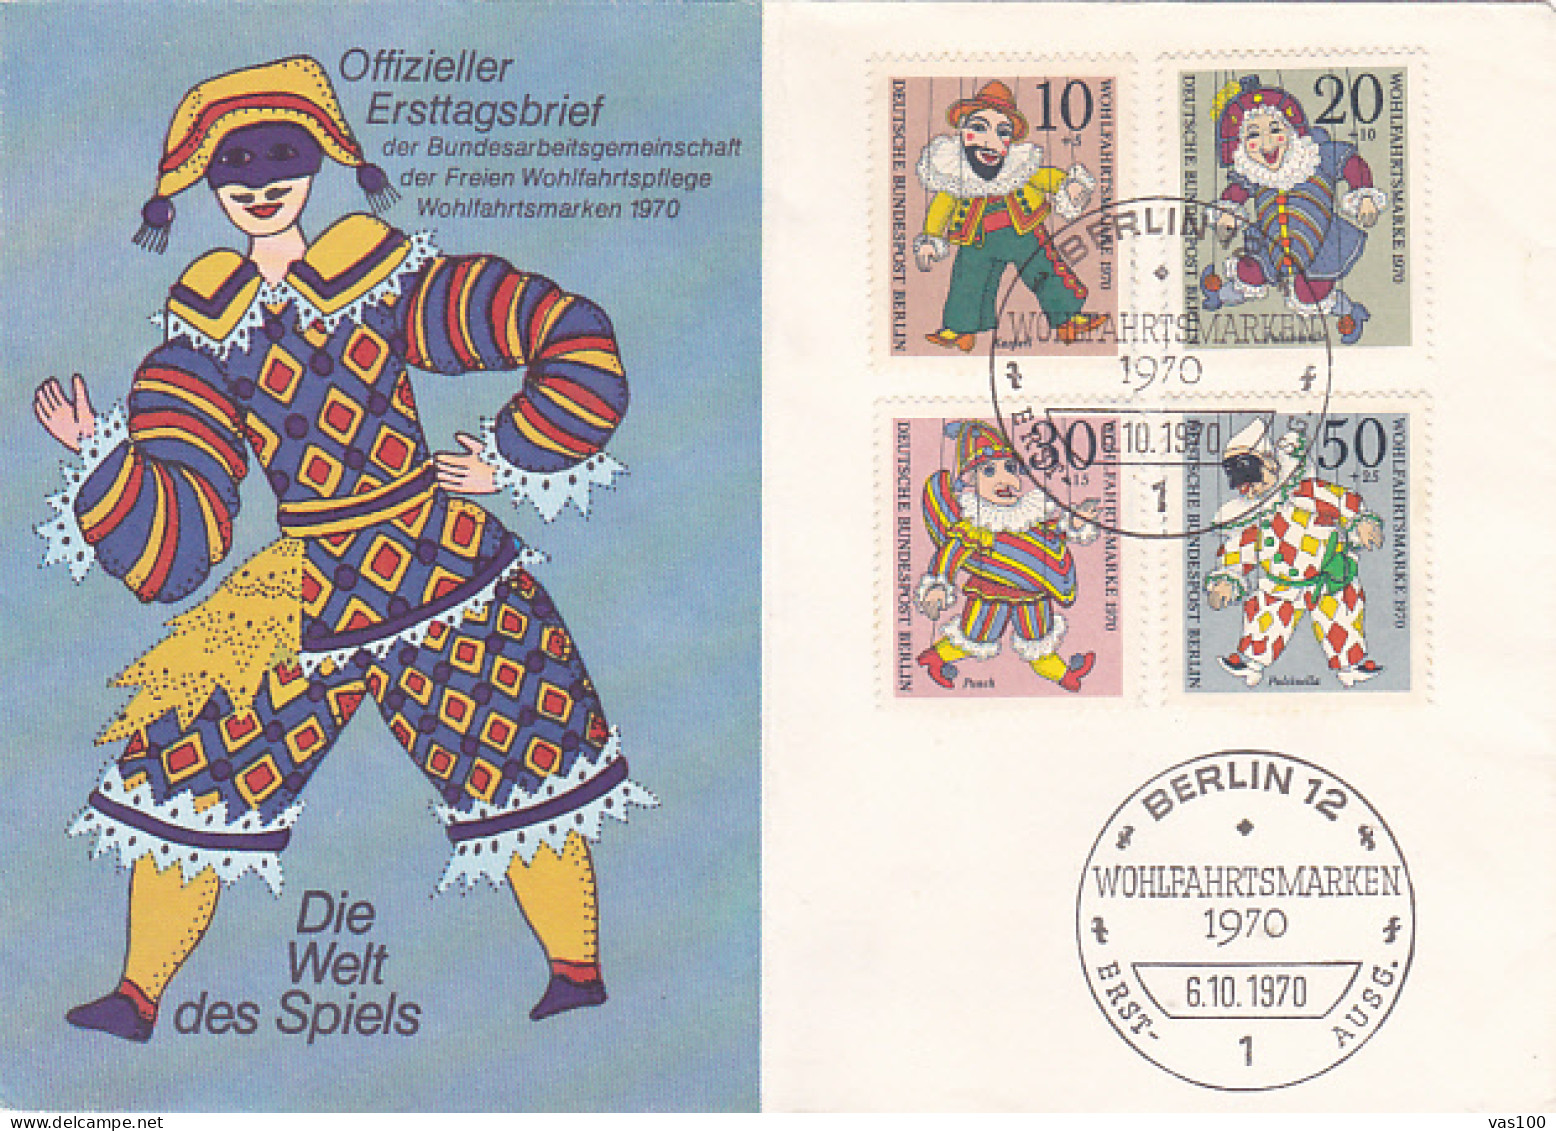 CHILDRENS, PUPPETS, CHARITY STAMPS, COVER FDC, 1970, GERMANY - Puppets